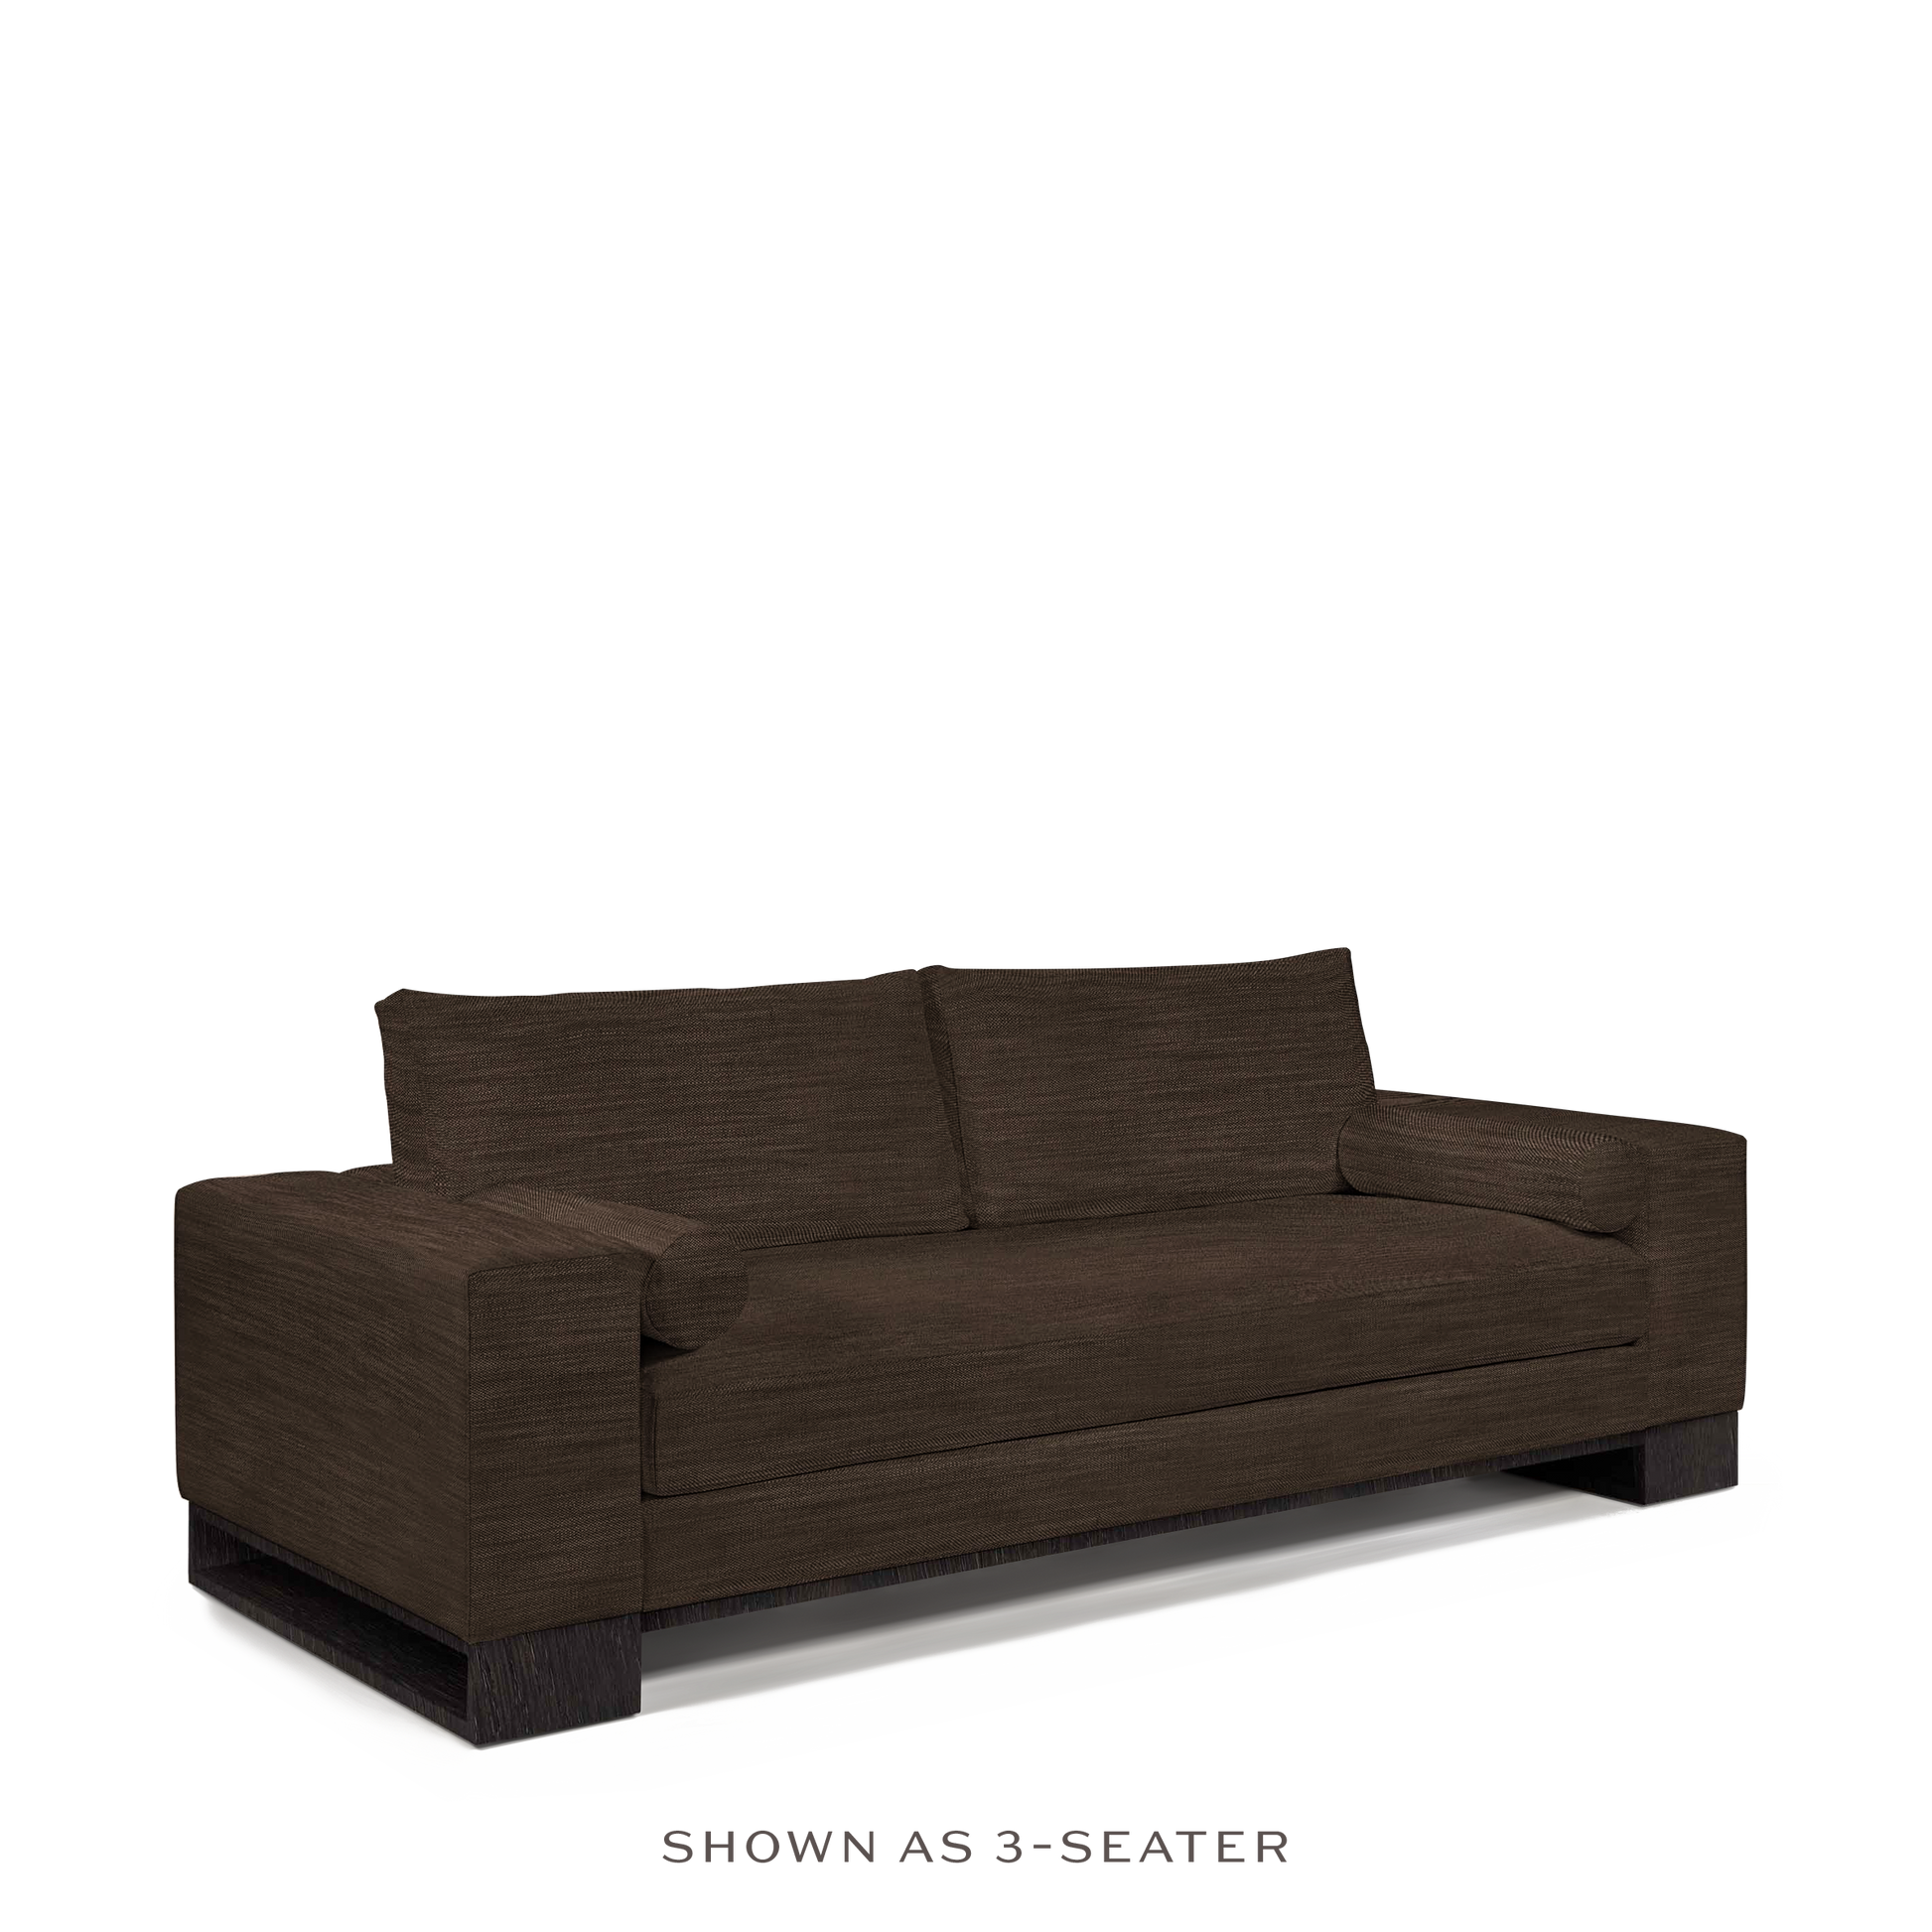 TERRA 3-seater sofa with brown textile and chocolate wood legs 